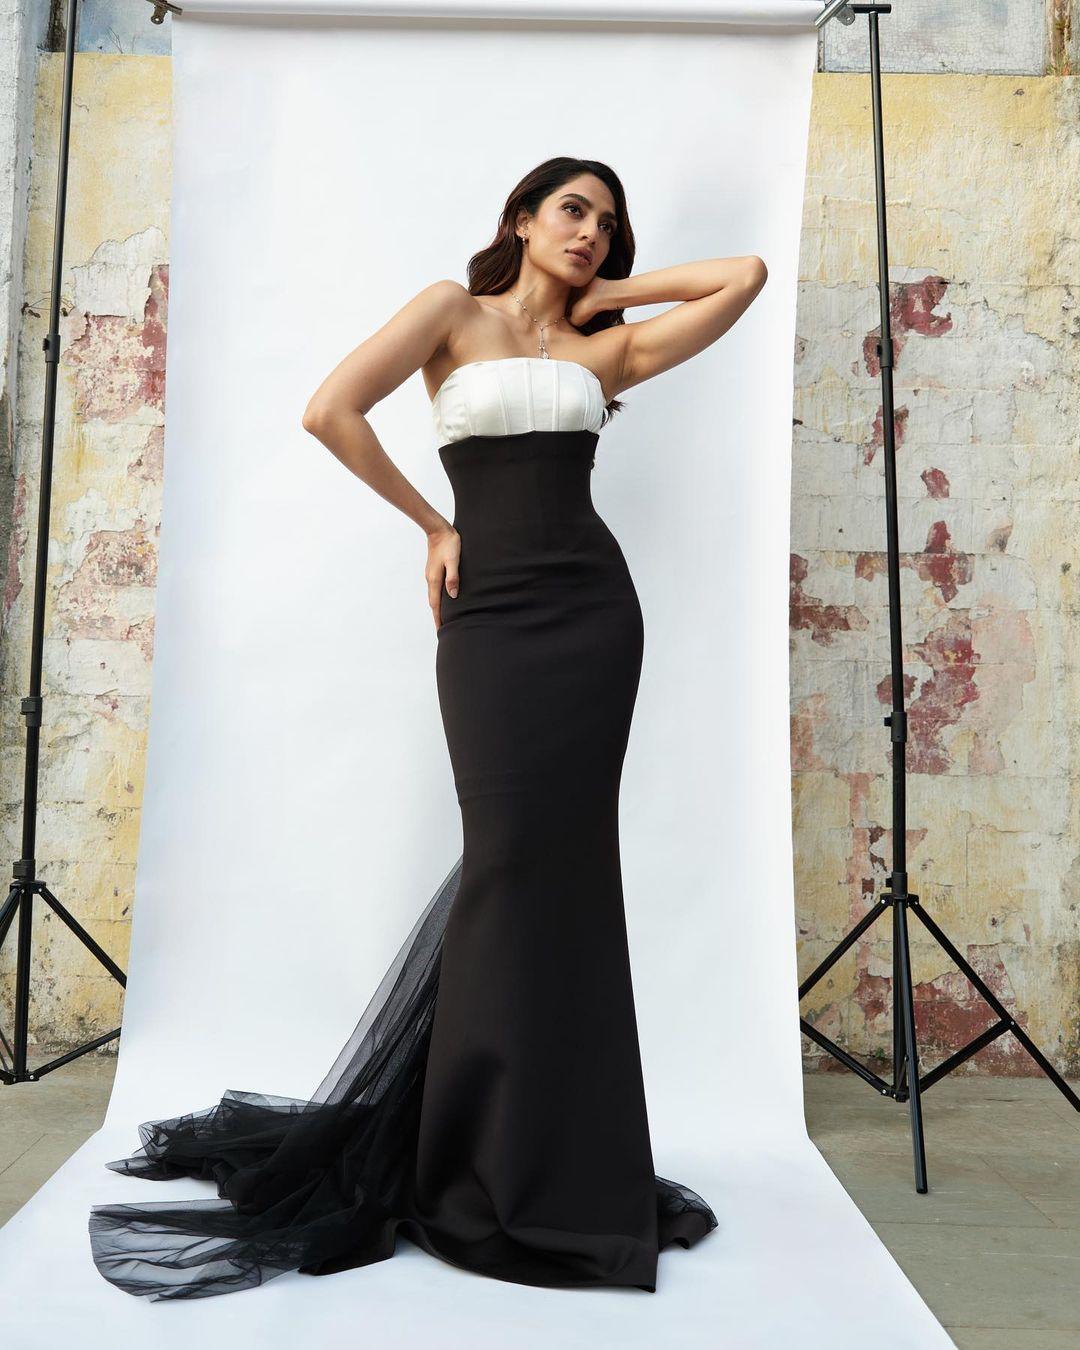 Sobhita Dhulipala impressed in a two-tone black and white gown, proving that she can rock a bodycon dress with grace and poise. The contrasting colours and sleek design highlighted her elegant silhouette, making it a memorable and sophisticated look